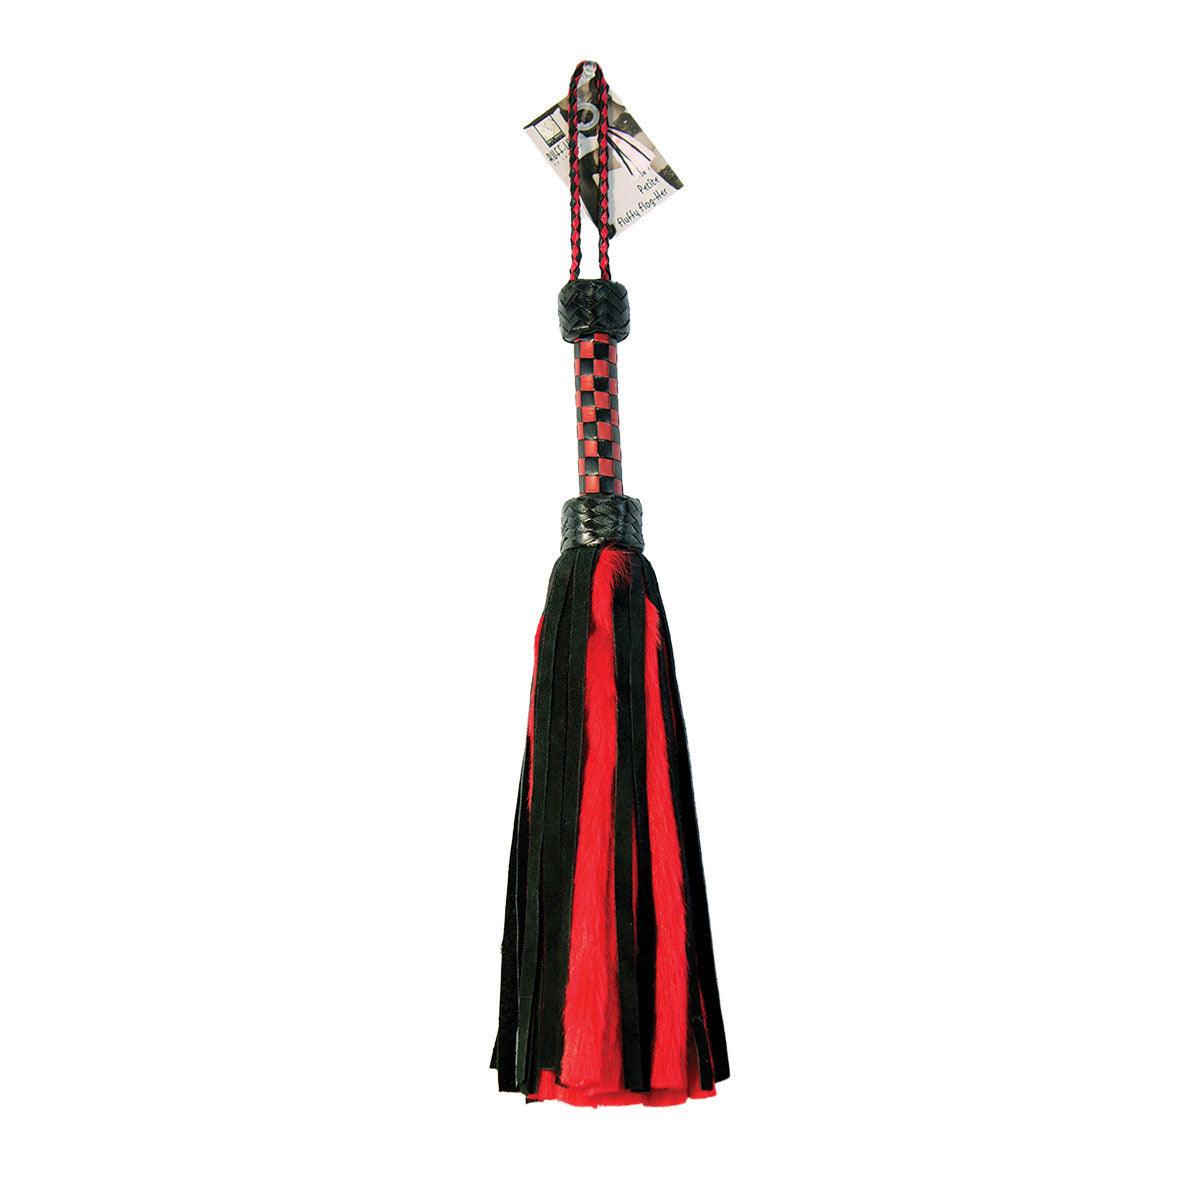 Suede and Fluff MINI Flogger - 18&quot; - Red-Black - shop enby